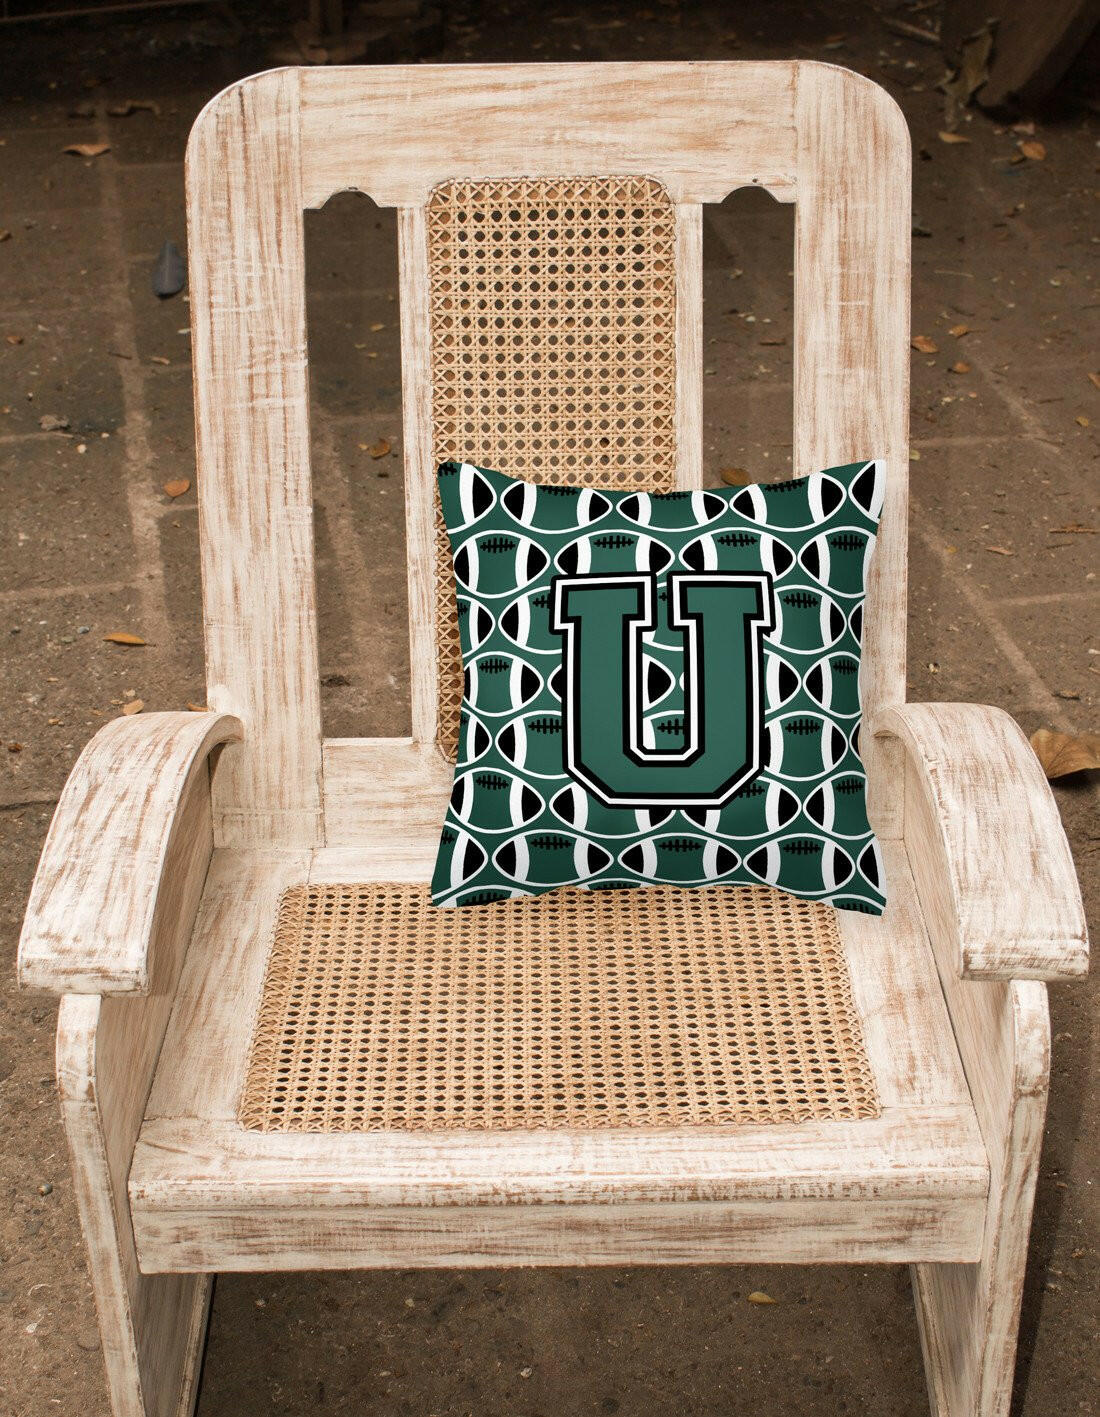 Letter U Football Green and White Fabric Decorative Pillow CJ1071-UPW1414 by Caroline's Treasures